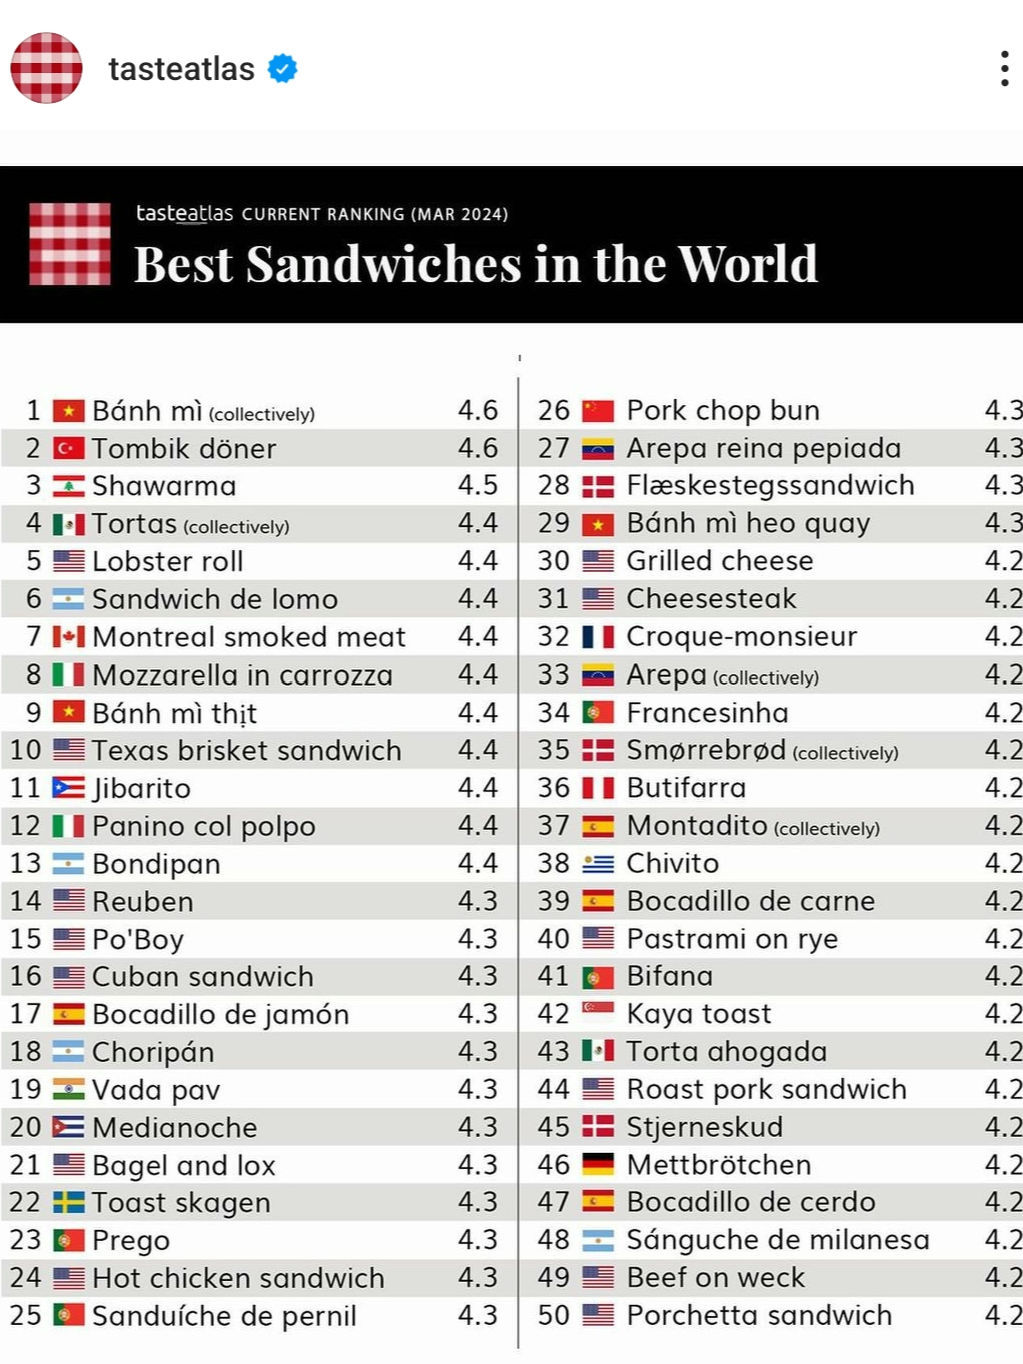 One of Mumbai’s most loved street foods, Vada Pav, has achieved global recognition by getting a spot on the ‘World’s Top 50 Best Sandwiches’ list.

❤️❤️❤️❤️❤️❤️❤️❤️

# # # 